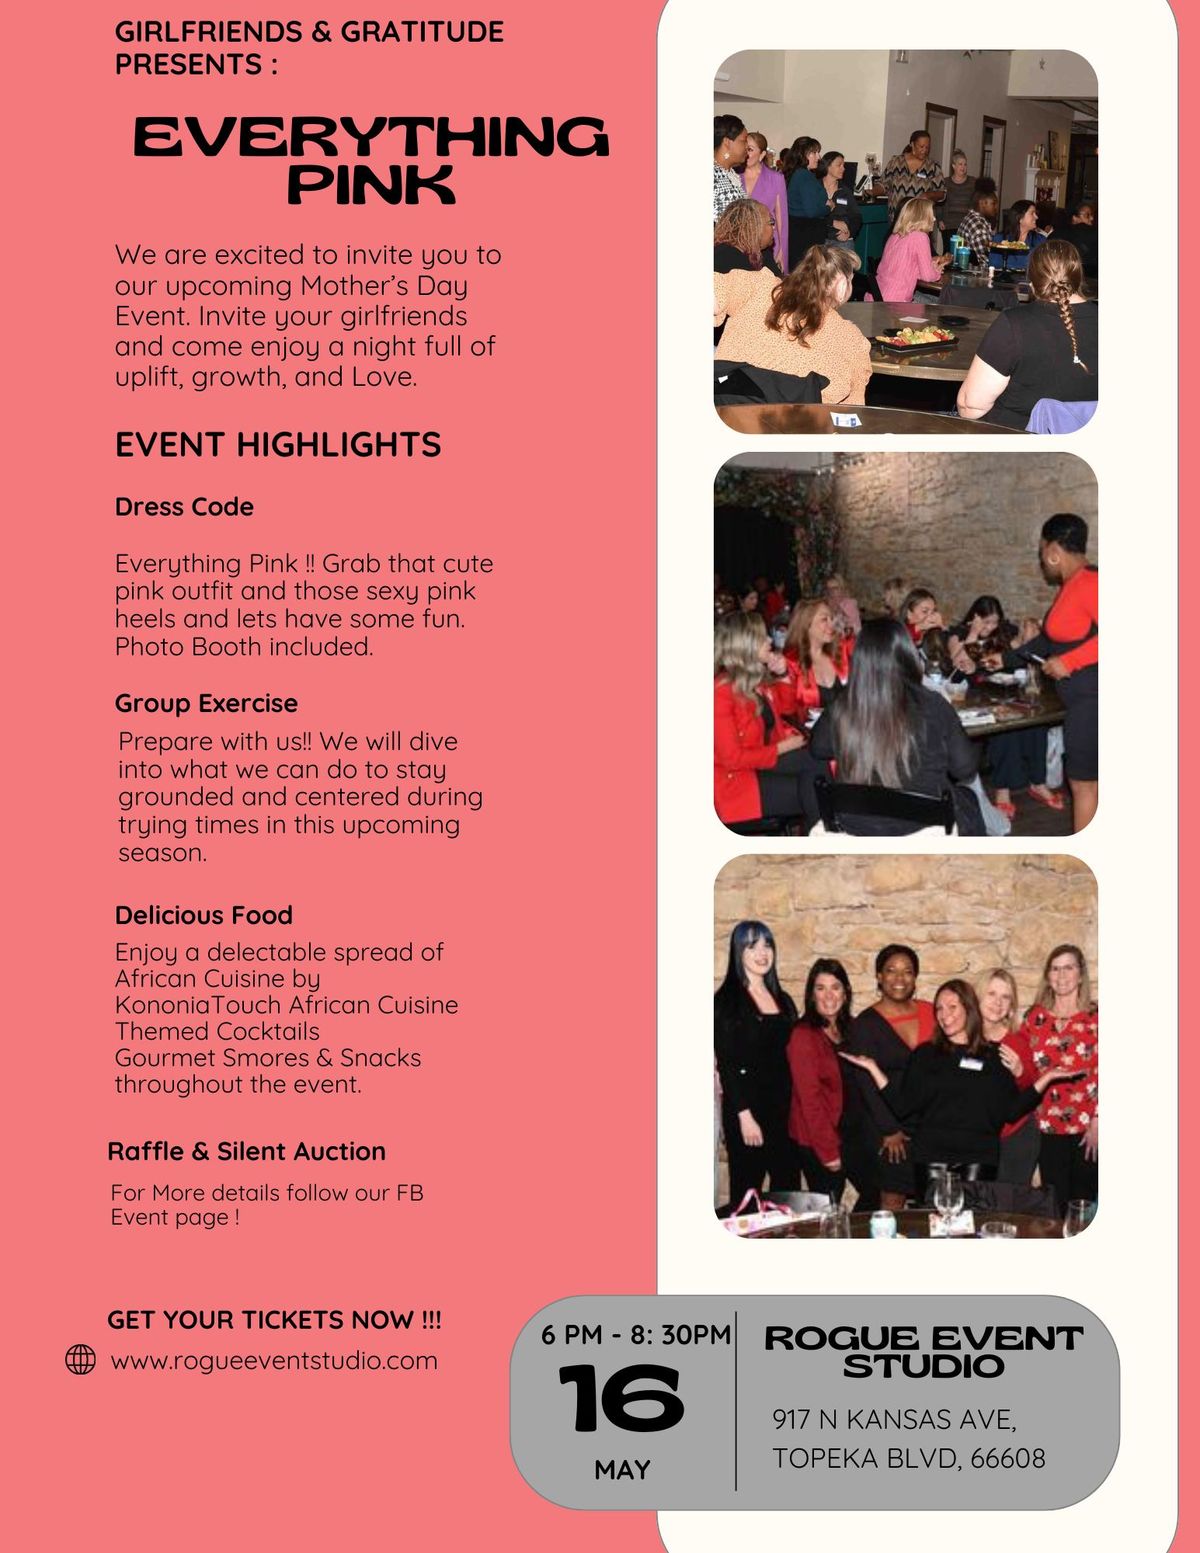 Girlfriends & Gratitude : EVERYTHING PINK ! Mother's Day Event